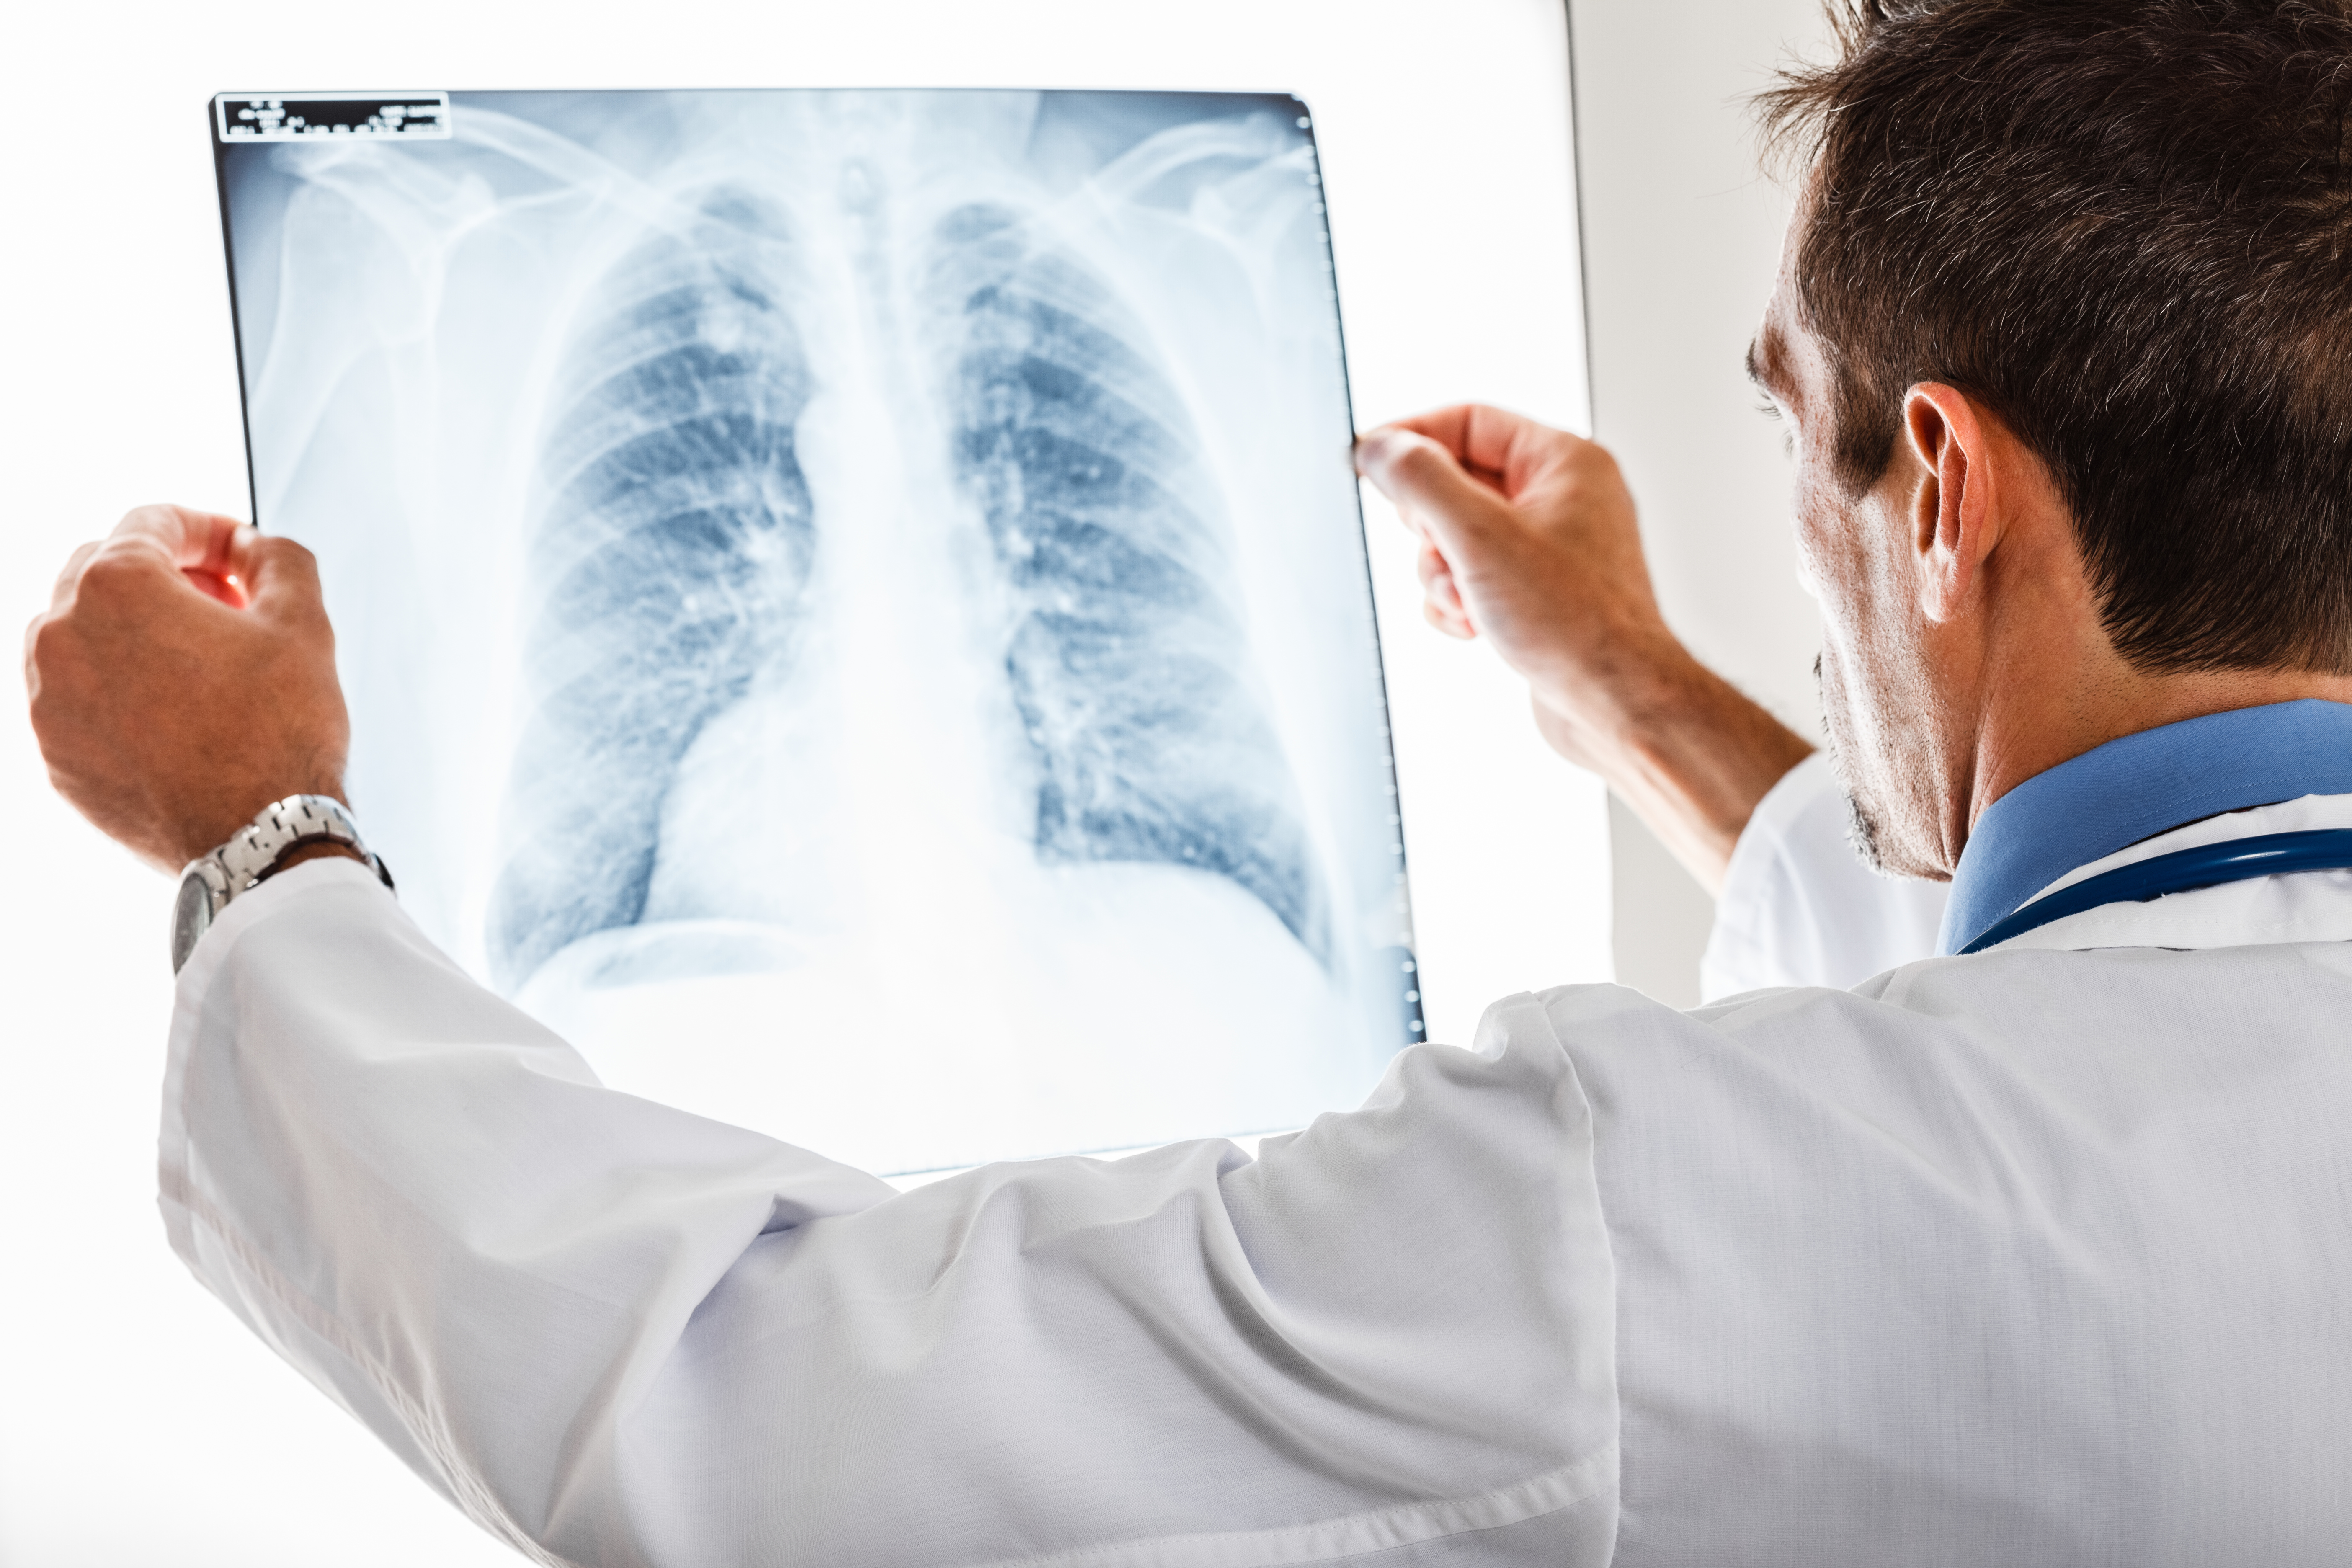 Omicron Replicates Slower In Lungs, Faster In Airways Of COVID-19 Patients: Study